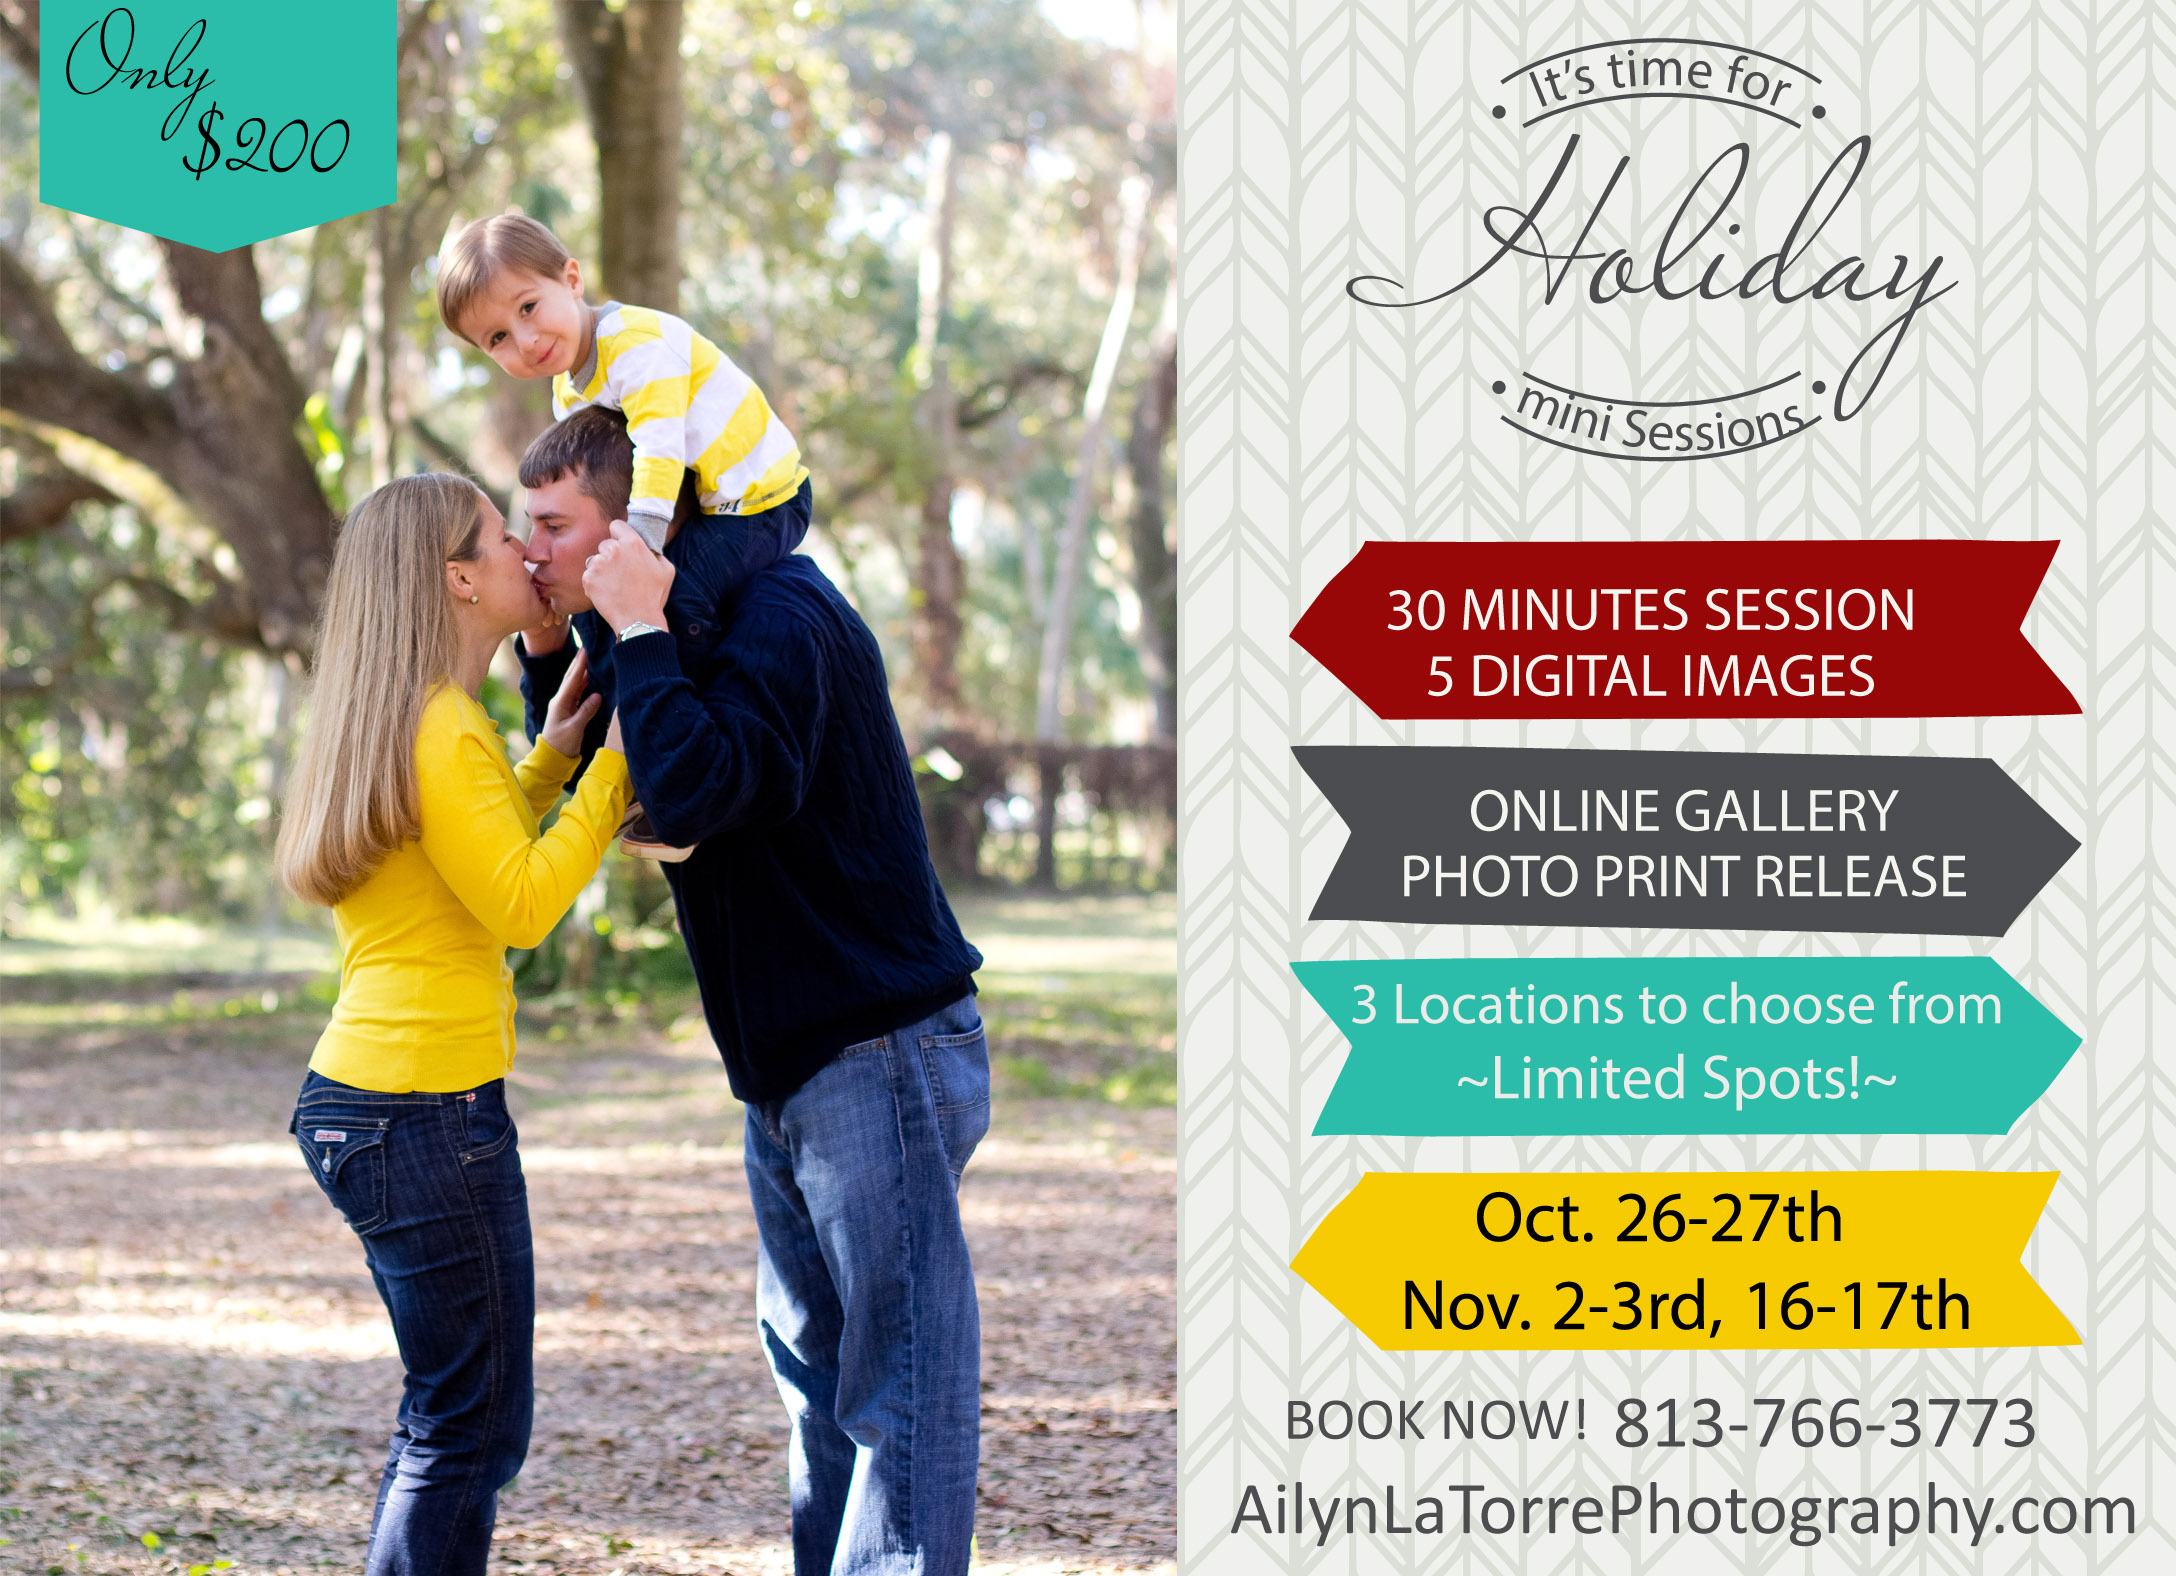 Tampa Photographer | © Ailyn La Torre Photography 2013